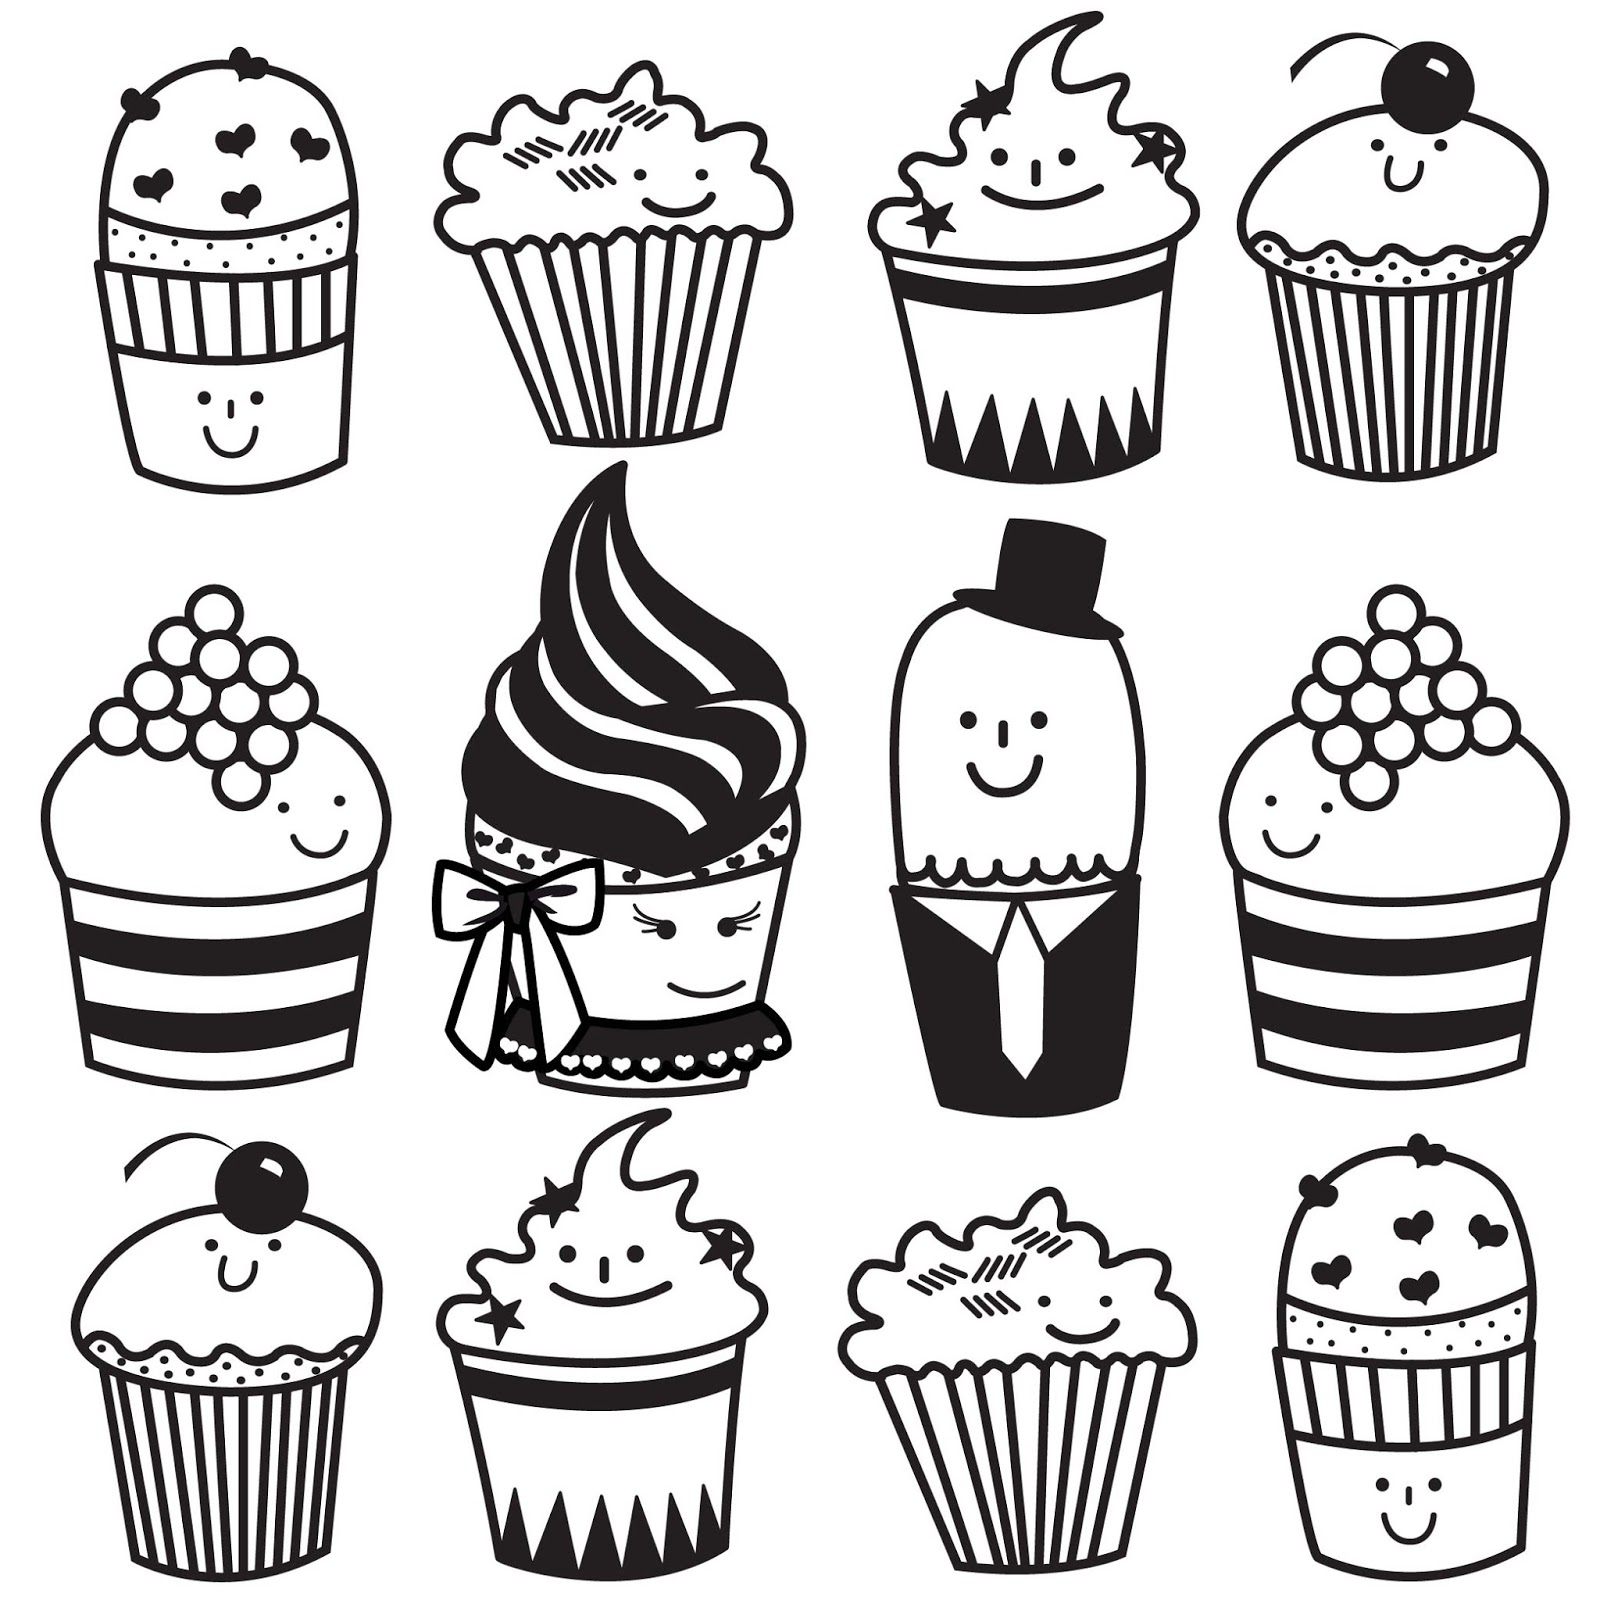 Cute Cupcake Line Drawing Images & Pictures - Becuo